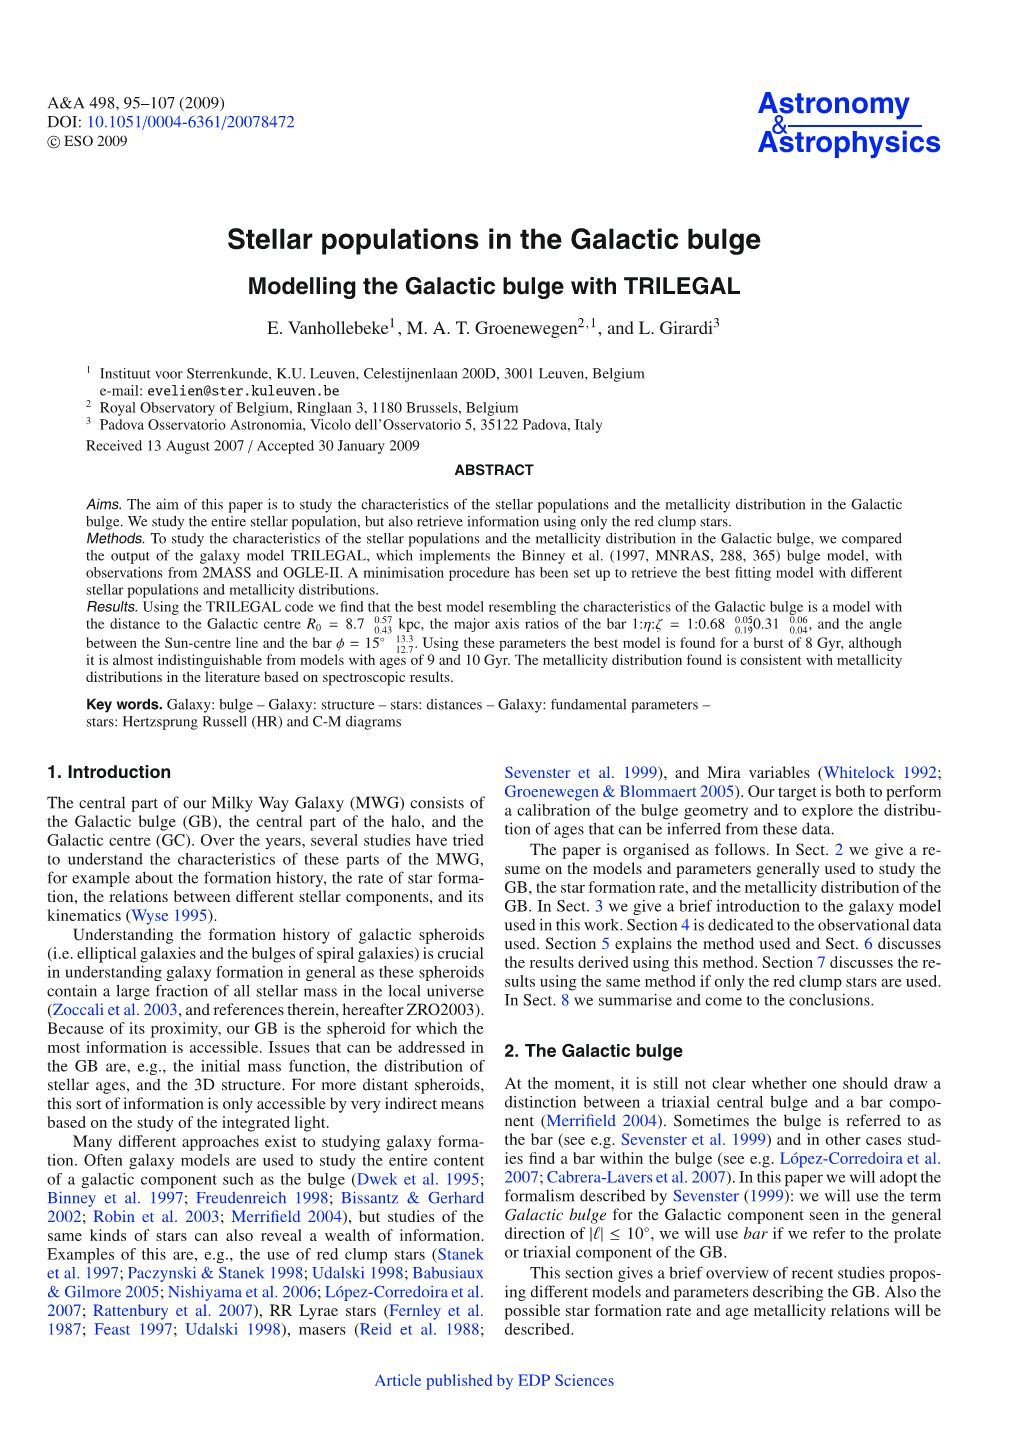 Stellar Populations in the Galactic Bulge Modelling the Galactic Bulge with TRILEGAL